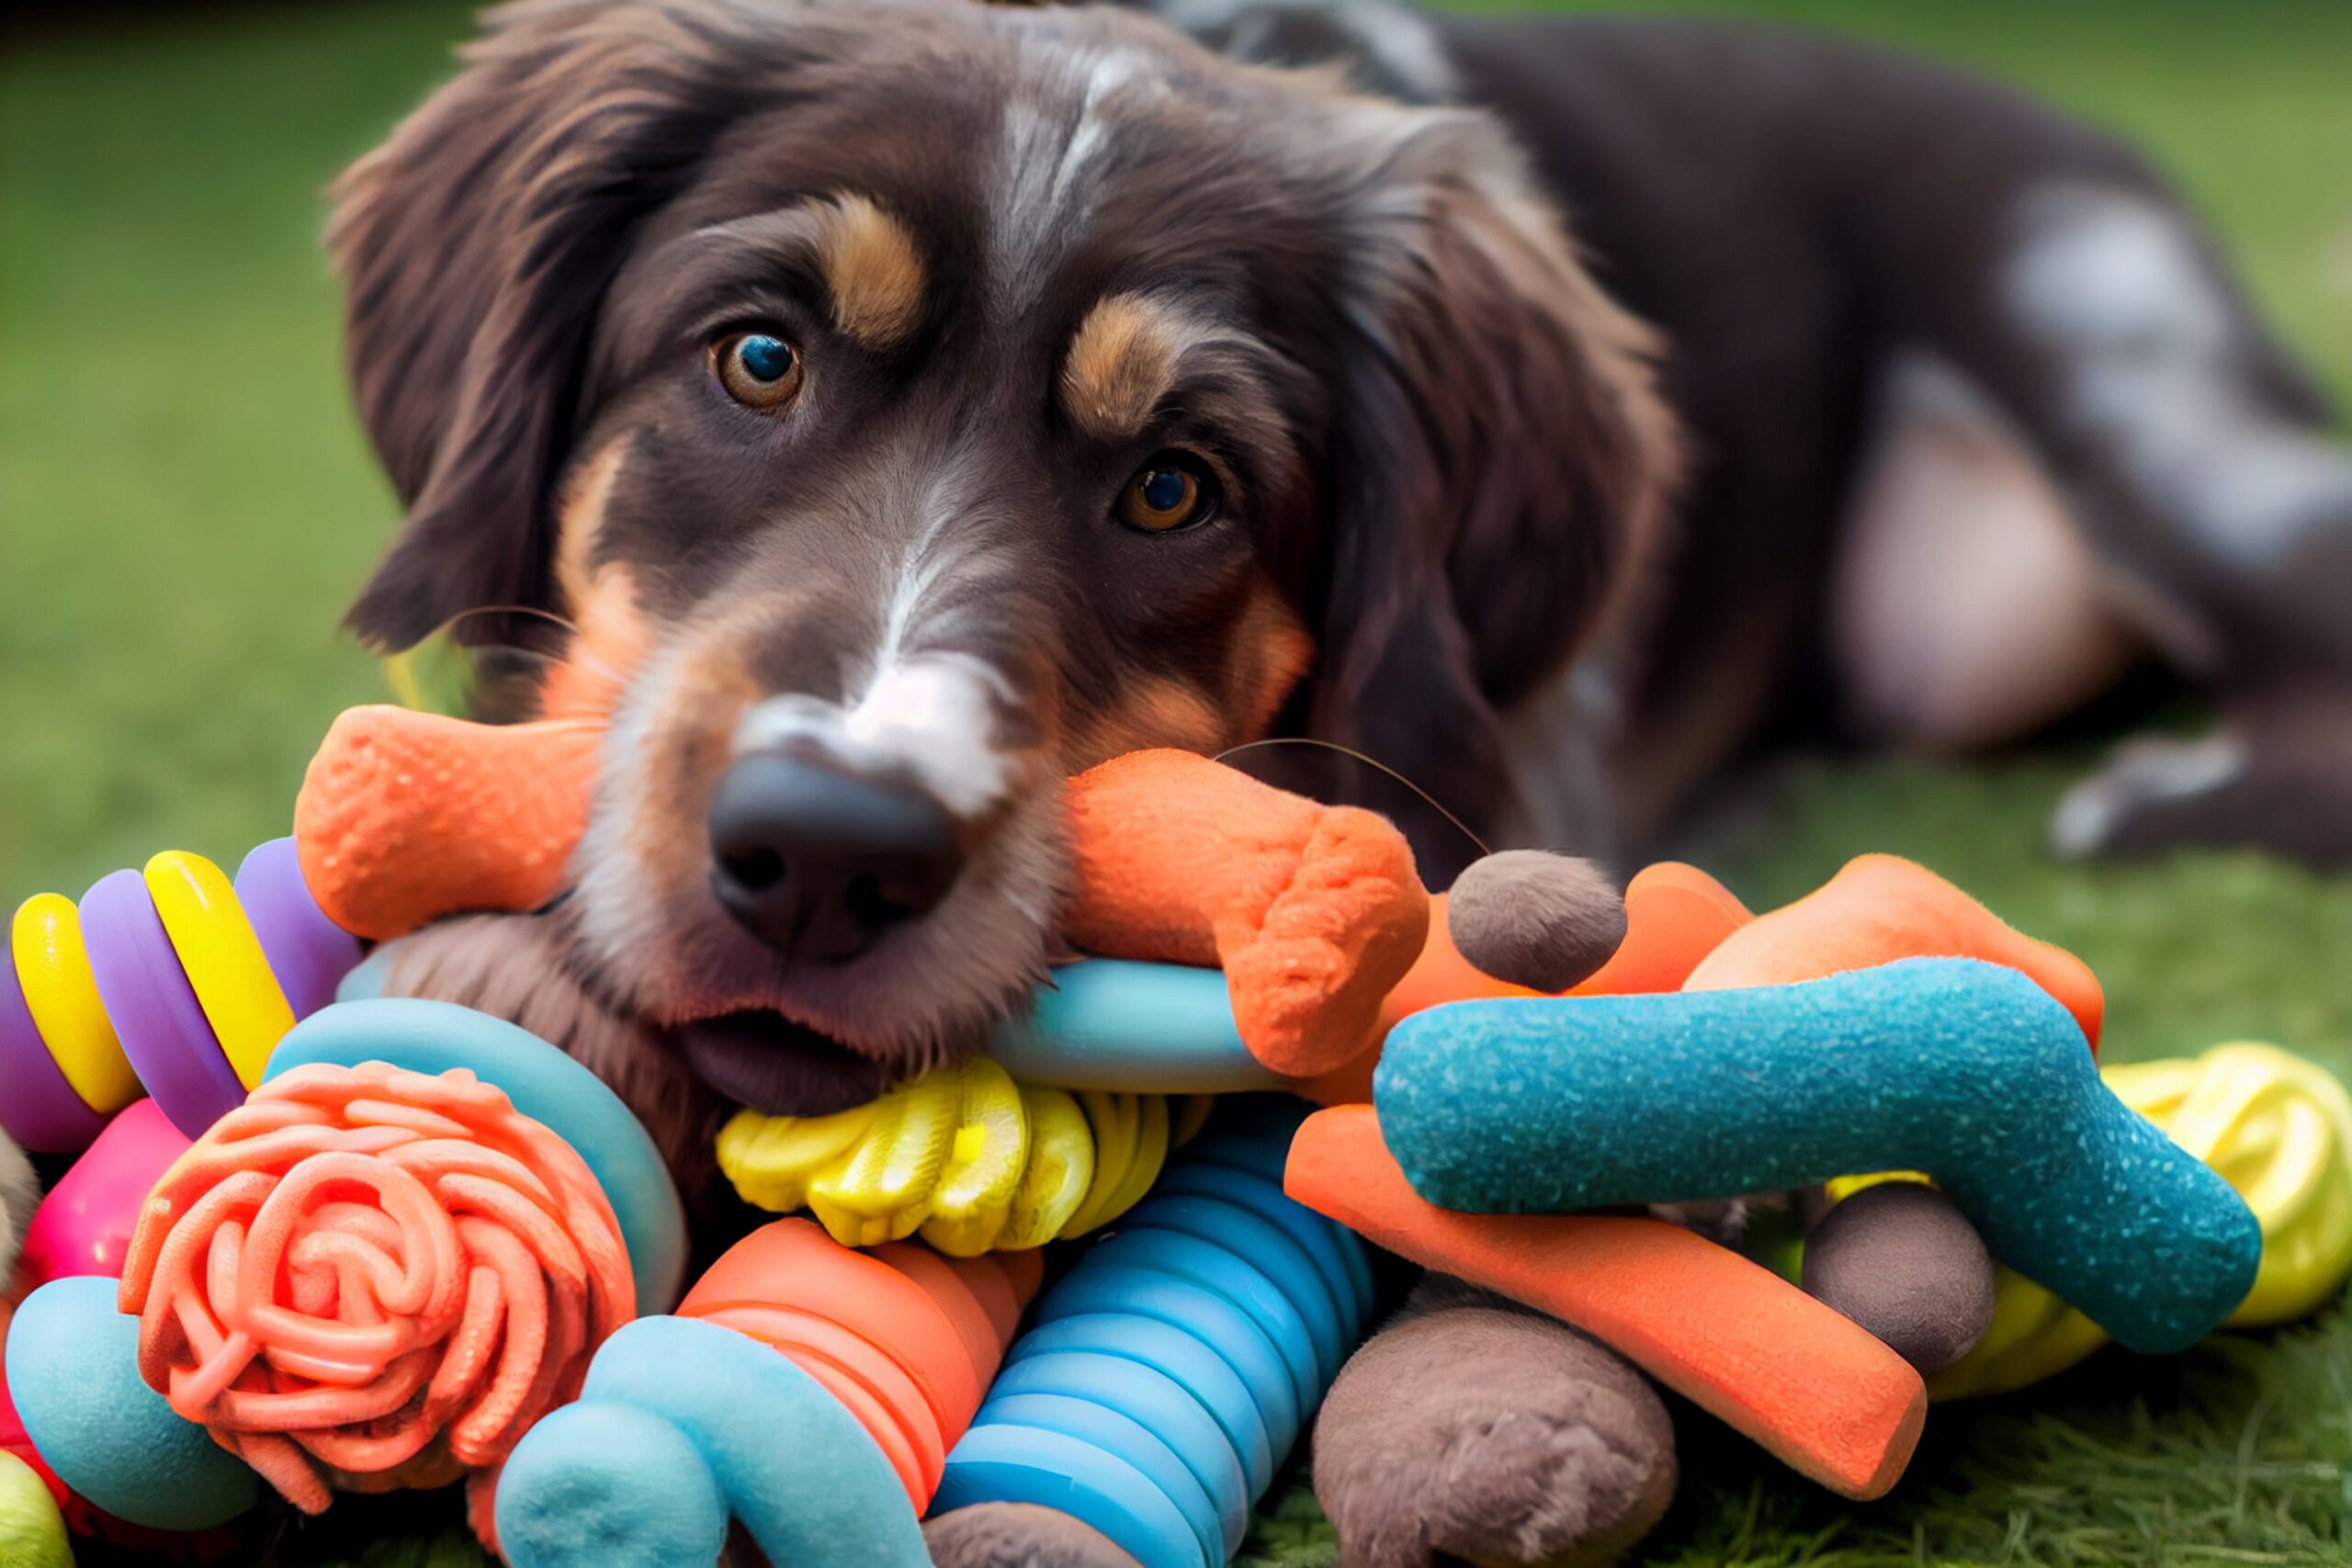 How to Keep Your Dog Busy and Stimulated - Clean Cans